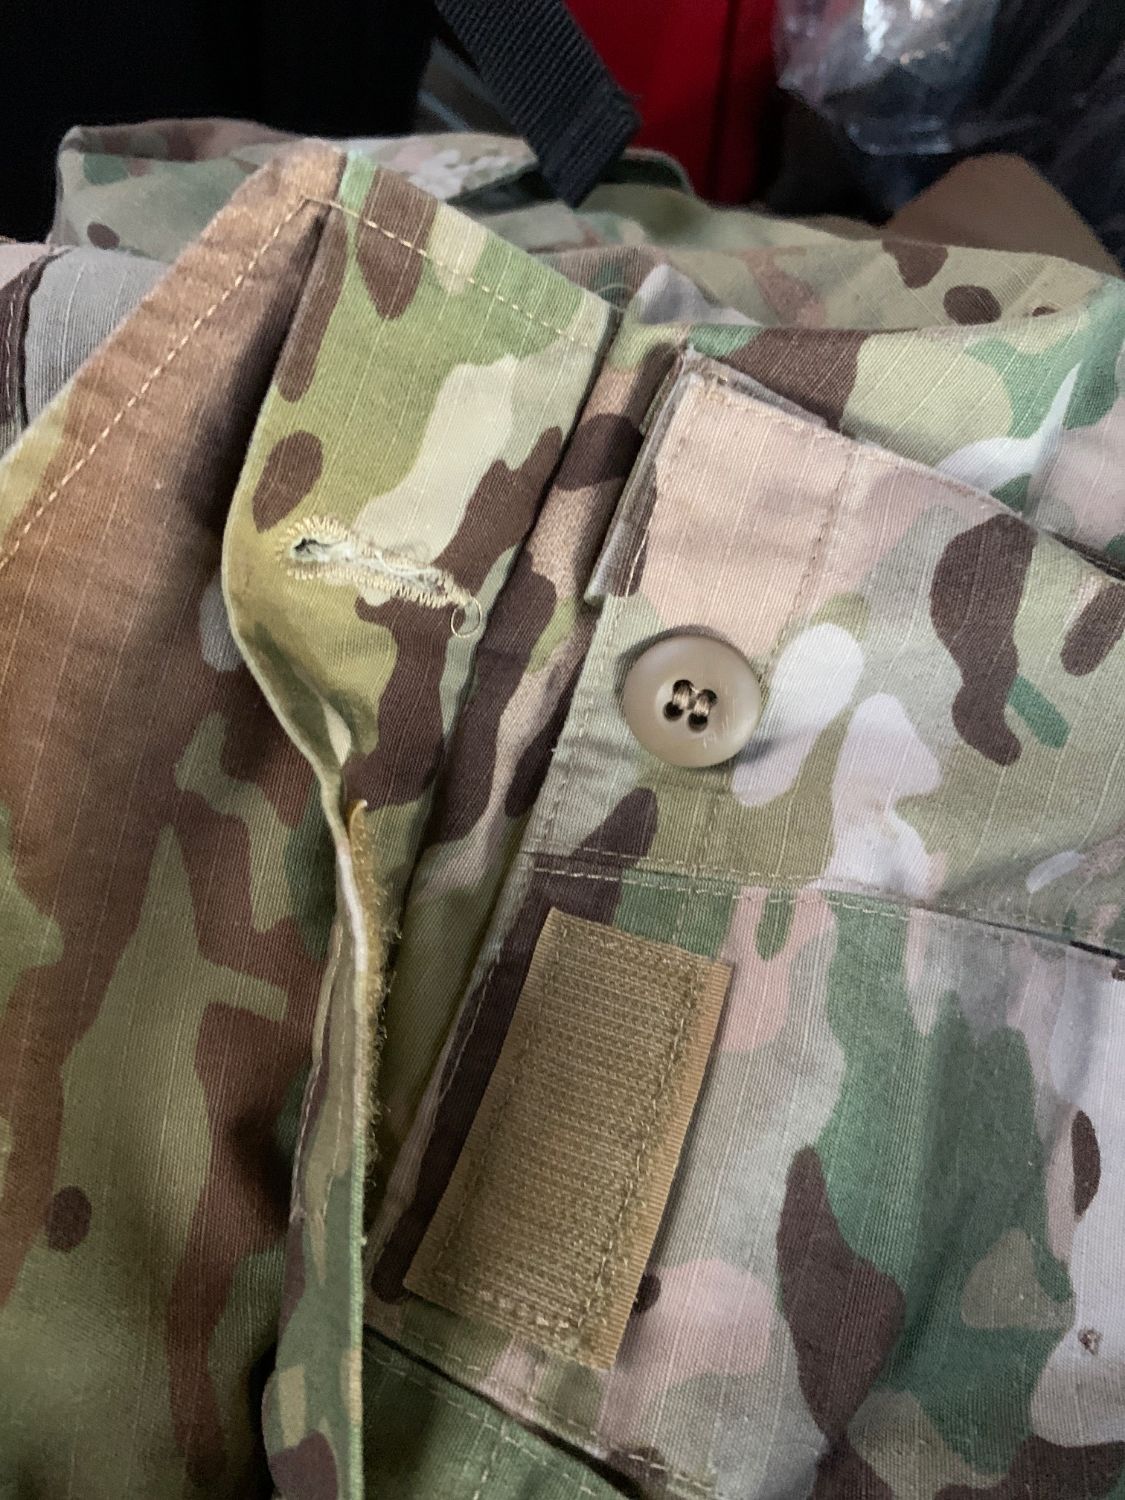 Crye Precision UKSF combat pants 34R - Gear - Airsoft Forums UK